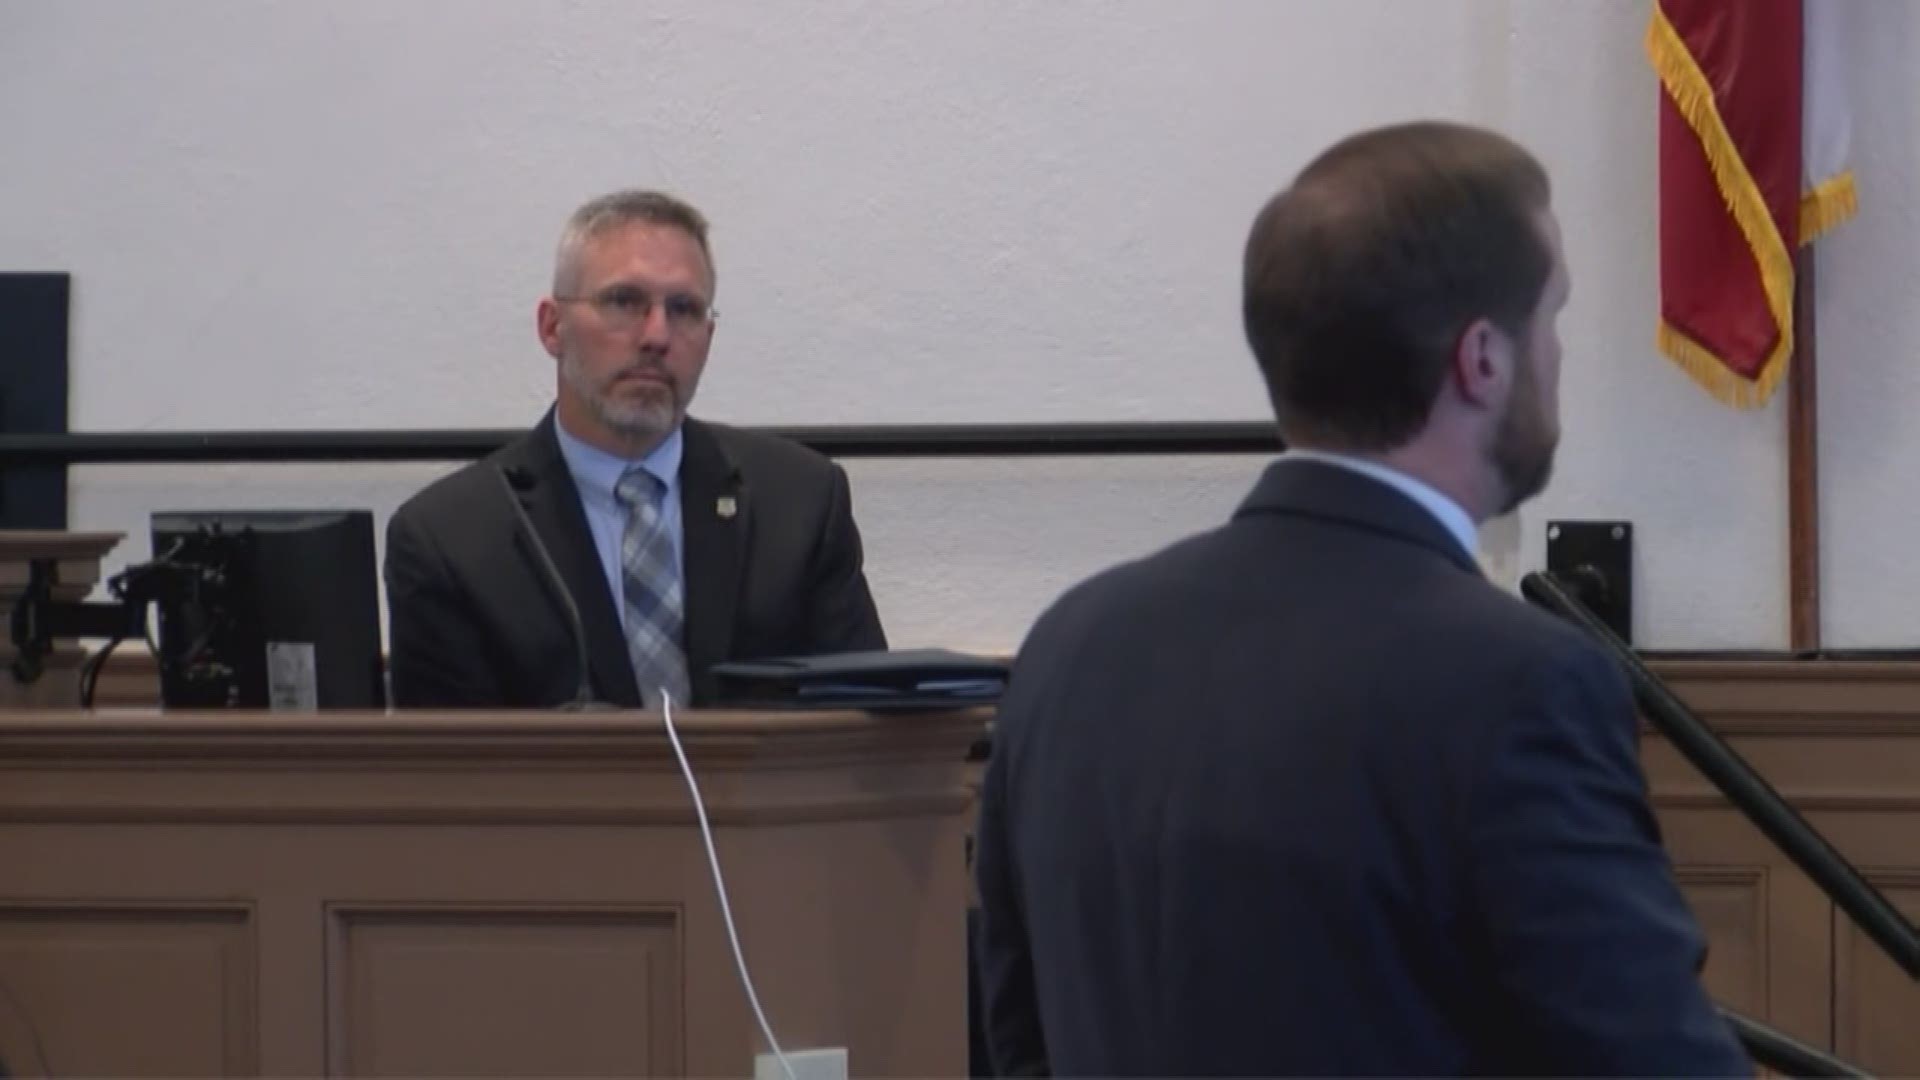 Bo Dukes, the man accused of burning and hiding beauty queen Tara Grinstead's body in 2005, is on trial. Agent Todd Crosby demonstrated how dirt was screened and searched for burned material or human bones to the jury.